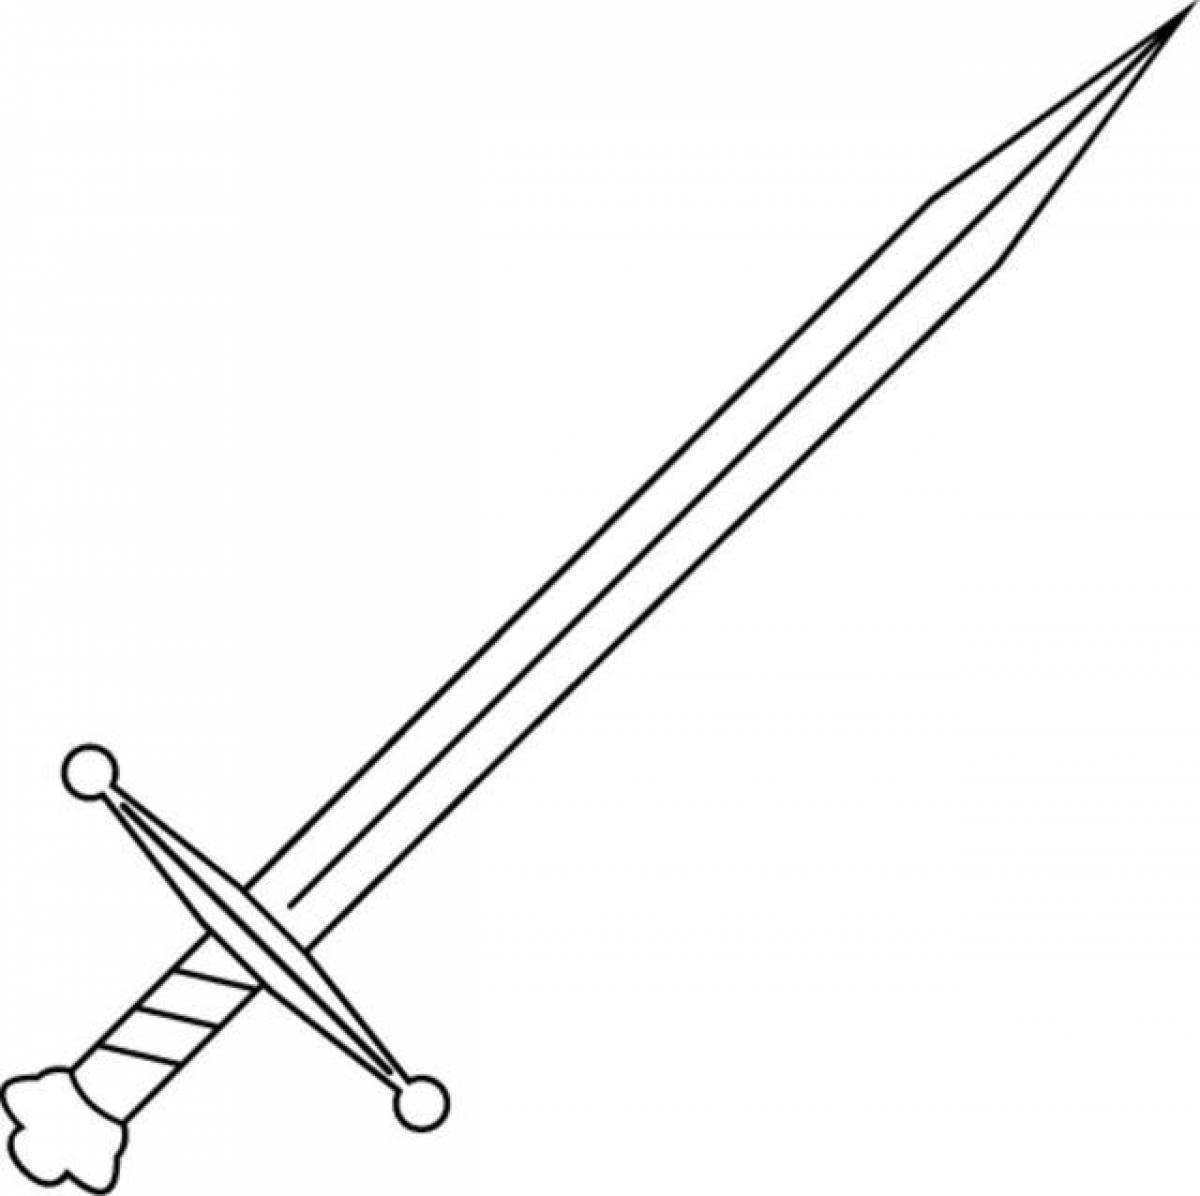 Innovative sword coloring page for kids